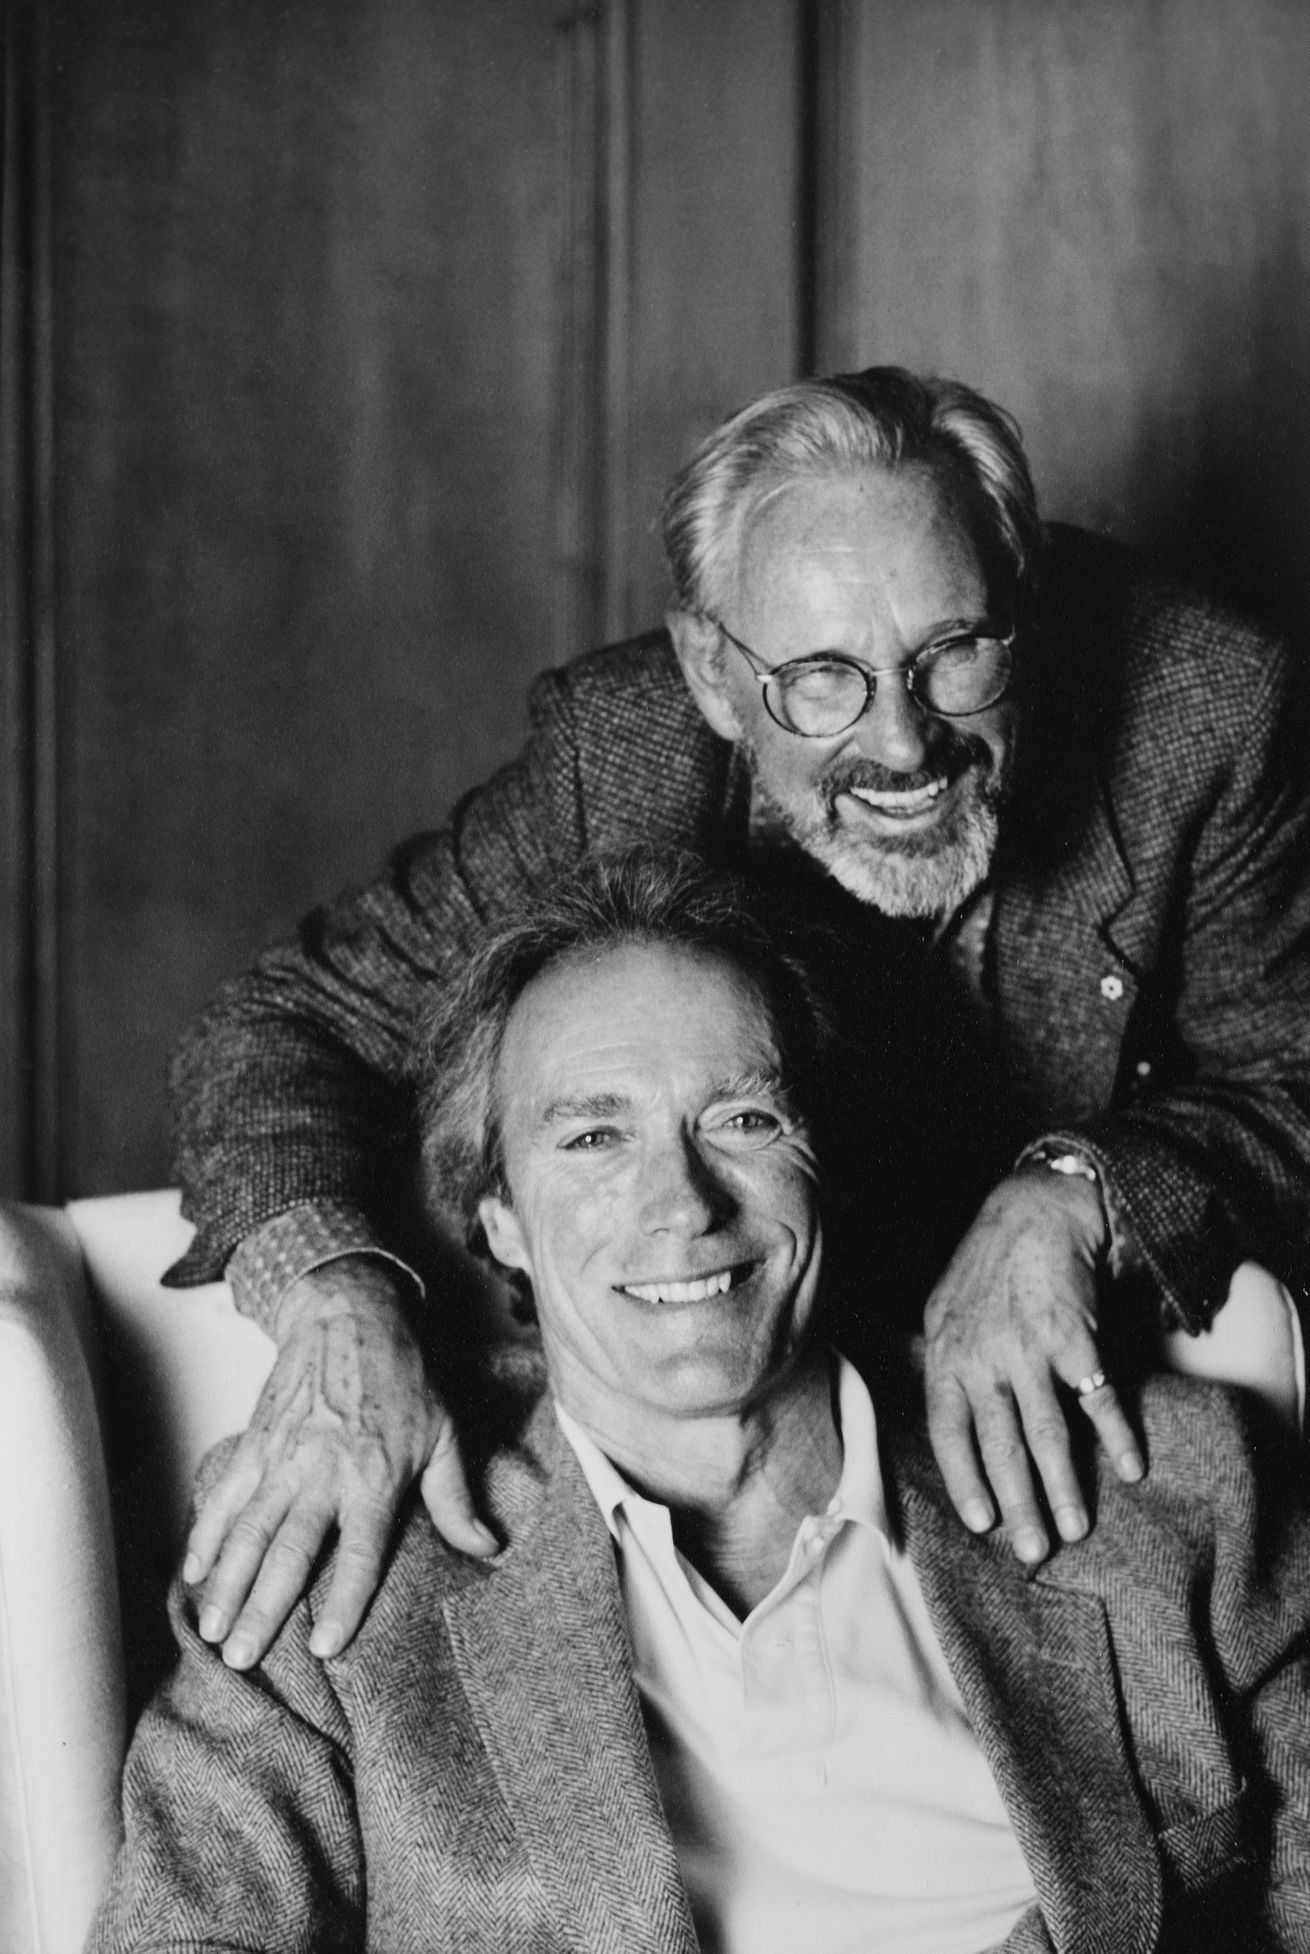 Clint Eastwood, Norman Jewison